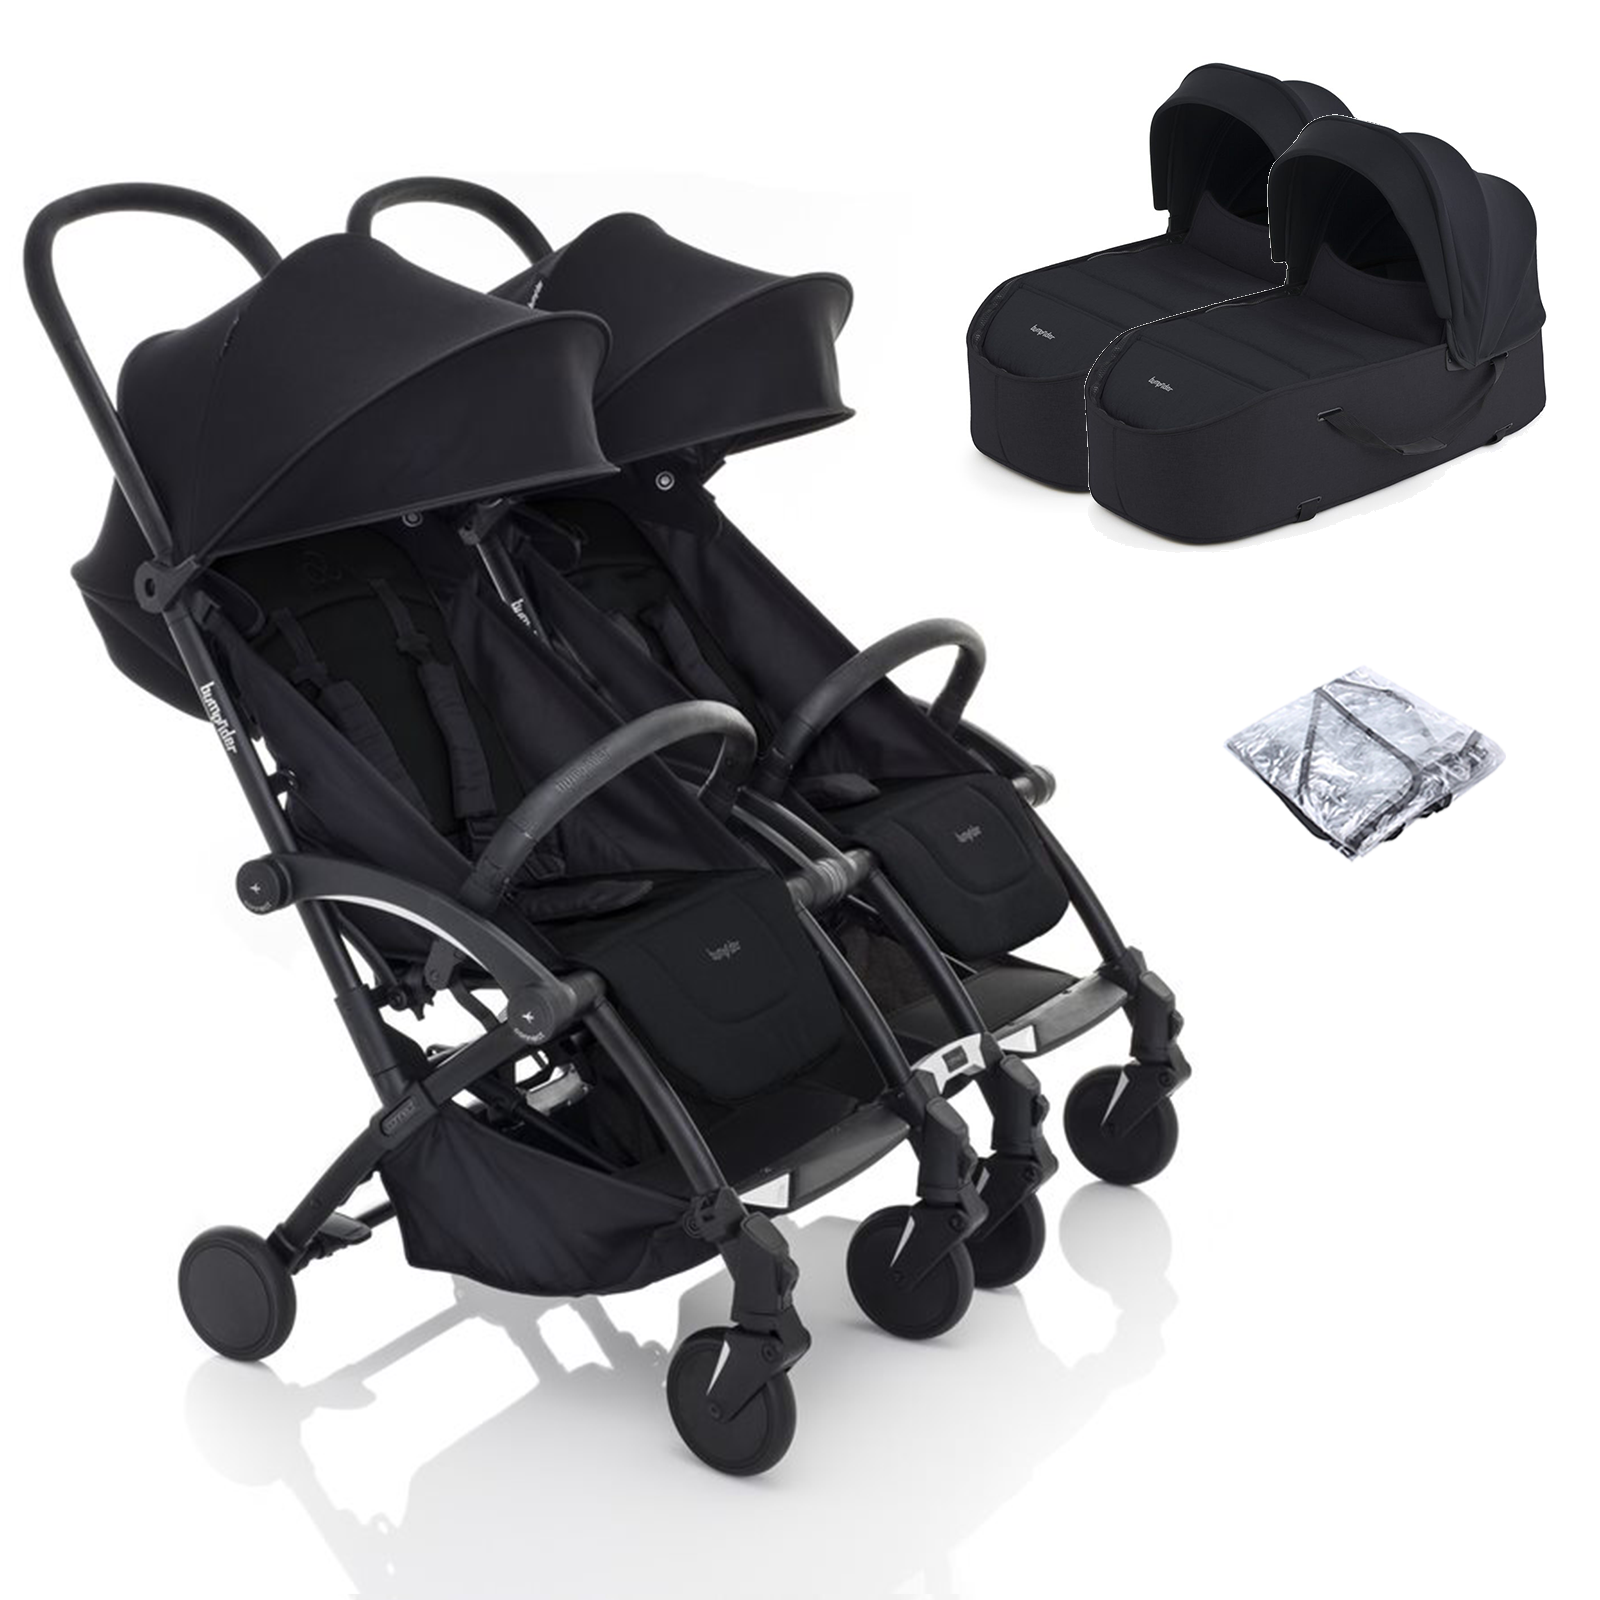 Bumprider Connect2 Double Stroller with Carrycot - Black